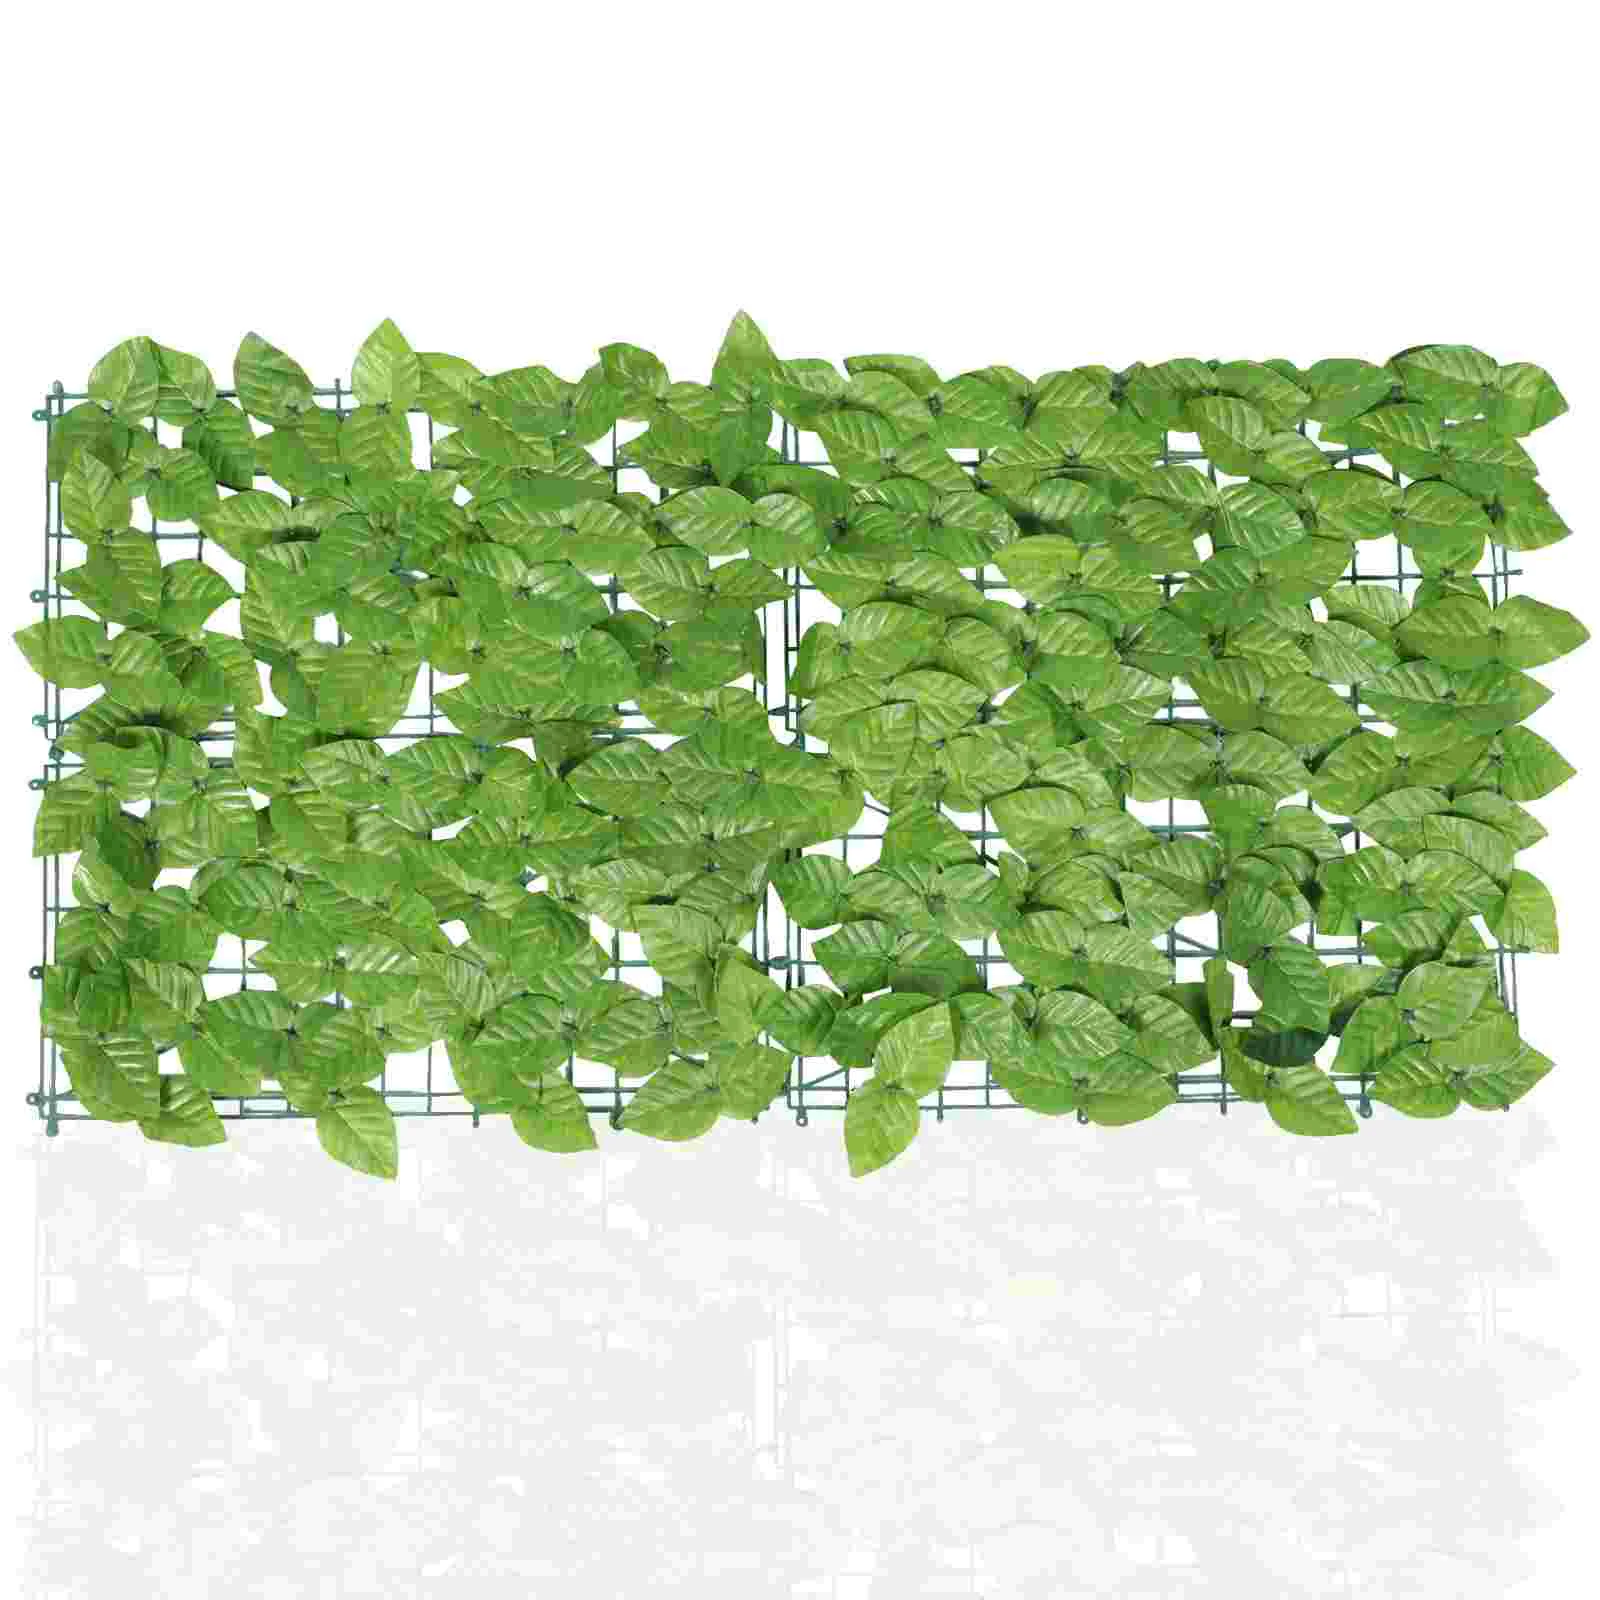 

Fence Wall Privacy Artificial Ivy Panels Screen Faux Hedge Greenery Leaves Grass Greendecorative Fencing Decor Garden Outdoor